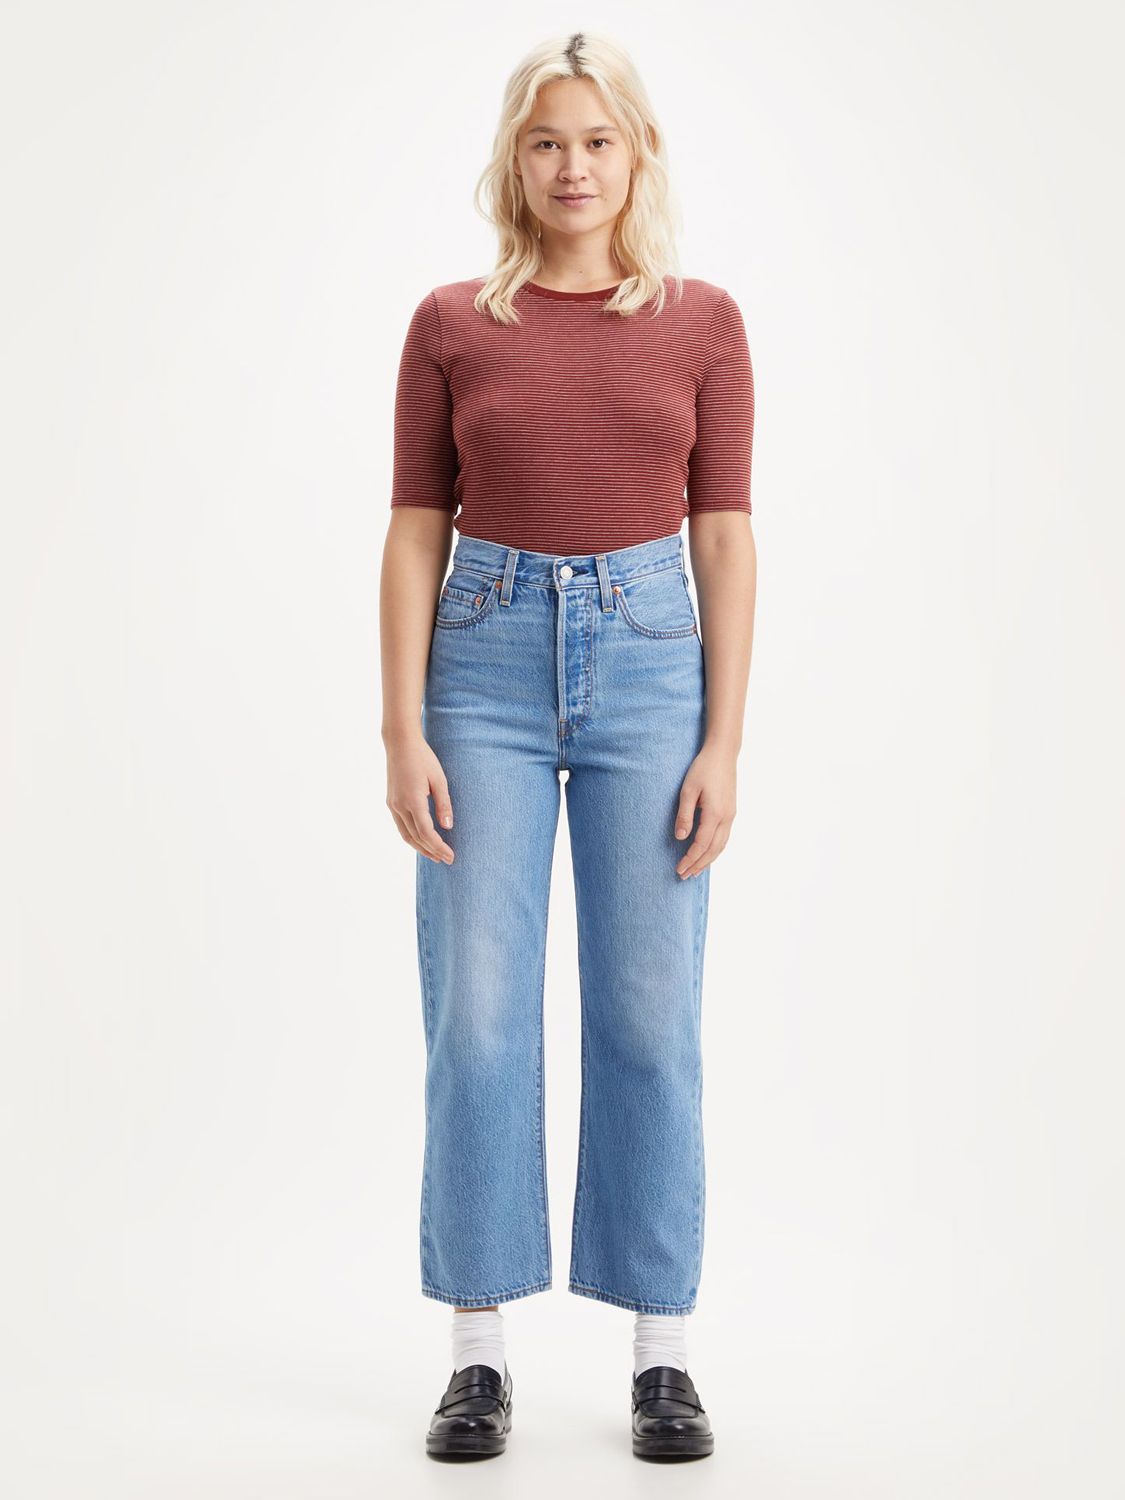 Levi's Ribcage Straight Cut Cropped Jeans, Indigo Worn In